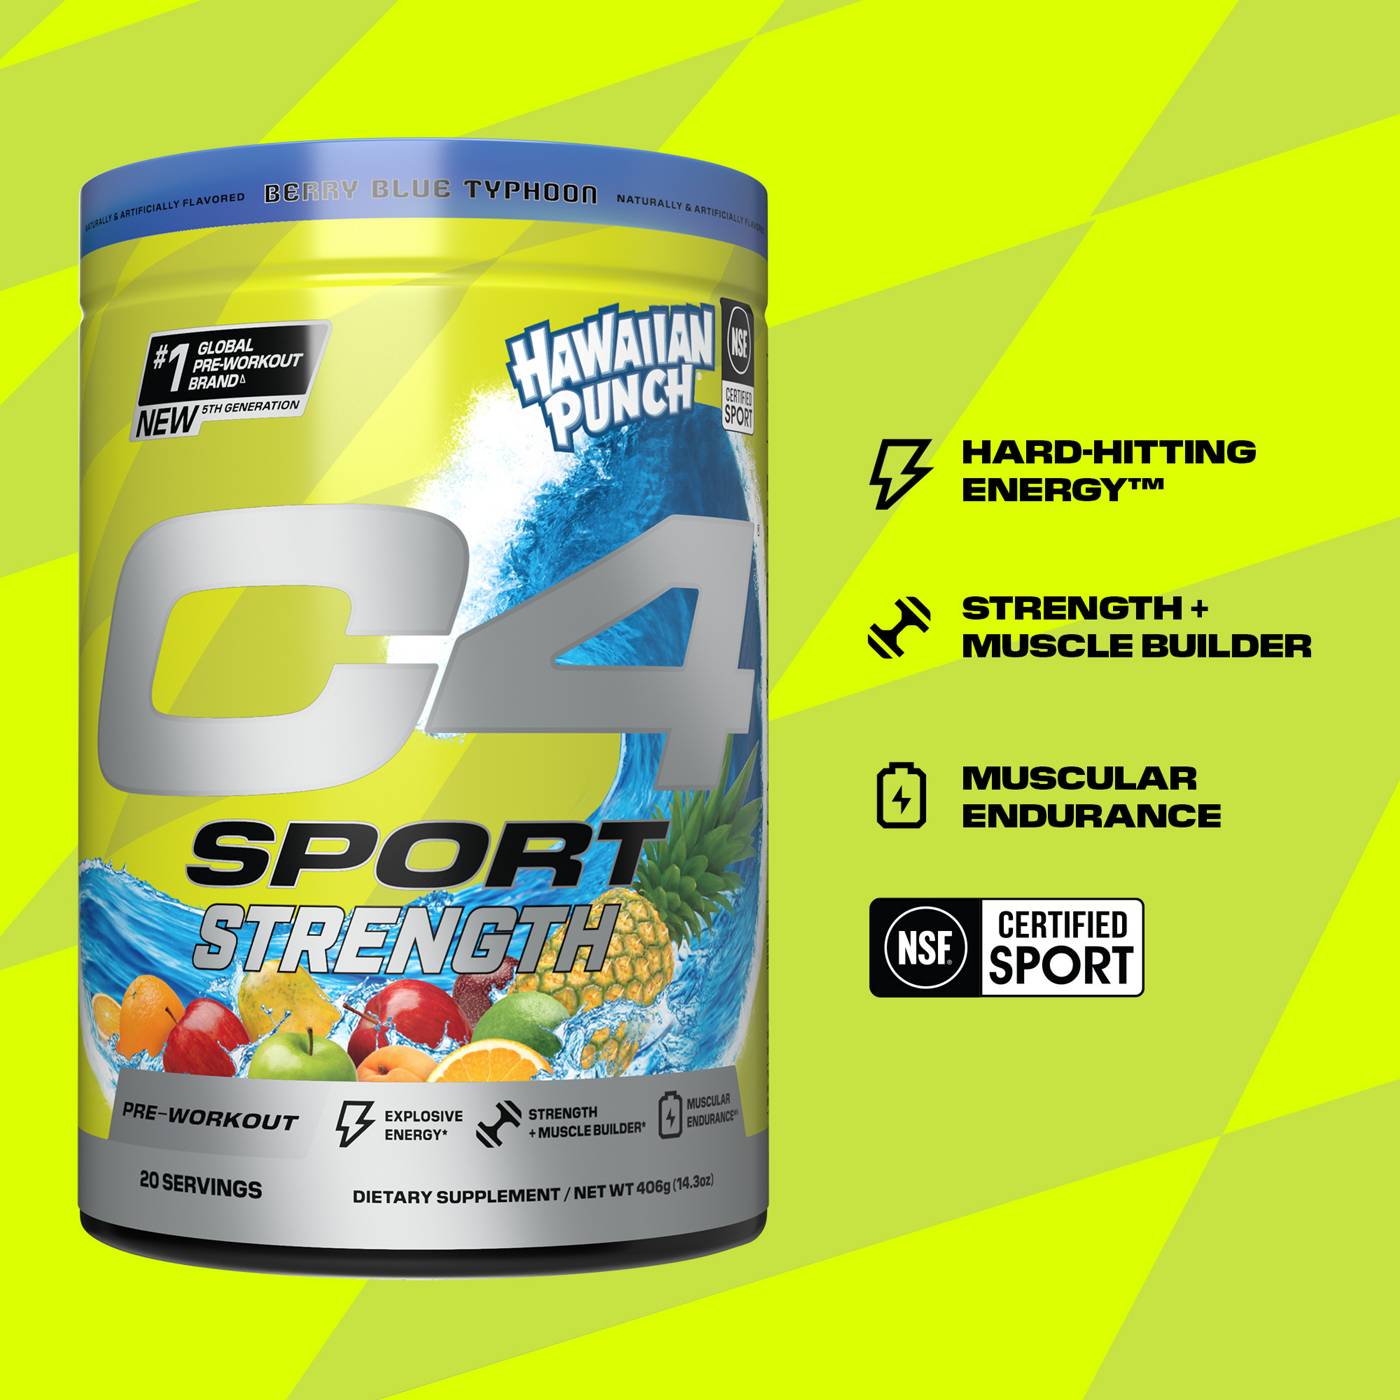 Cellucor C4 Sport  Pre-Workout - Hawaiian Punch Blue Typhoon; image 8 of 8